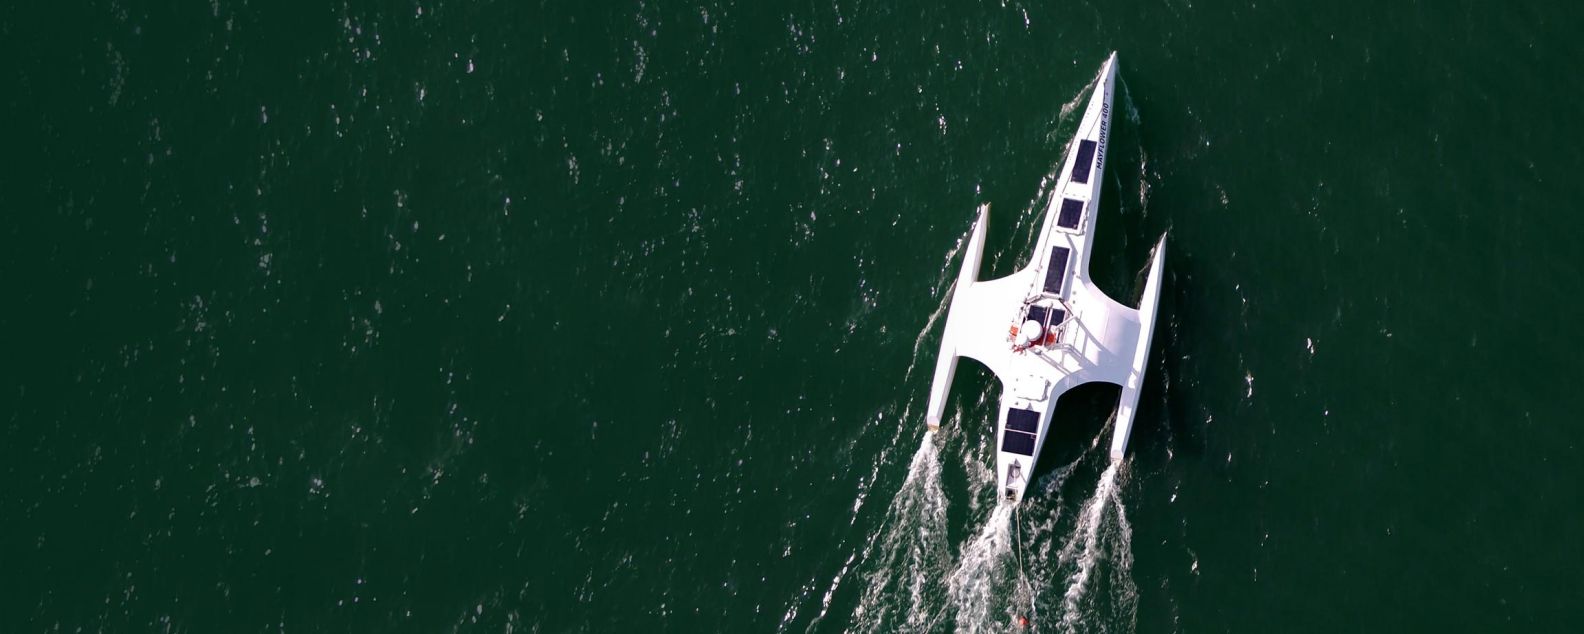 Aerial view of the maritime research vessel Mayflower Autonomous Ship sailing across the sea